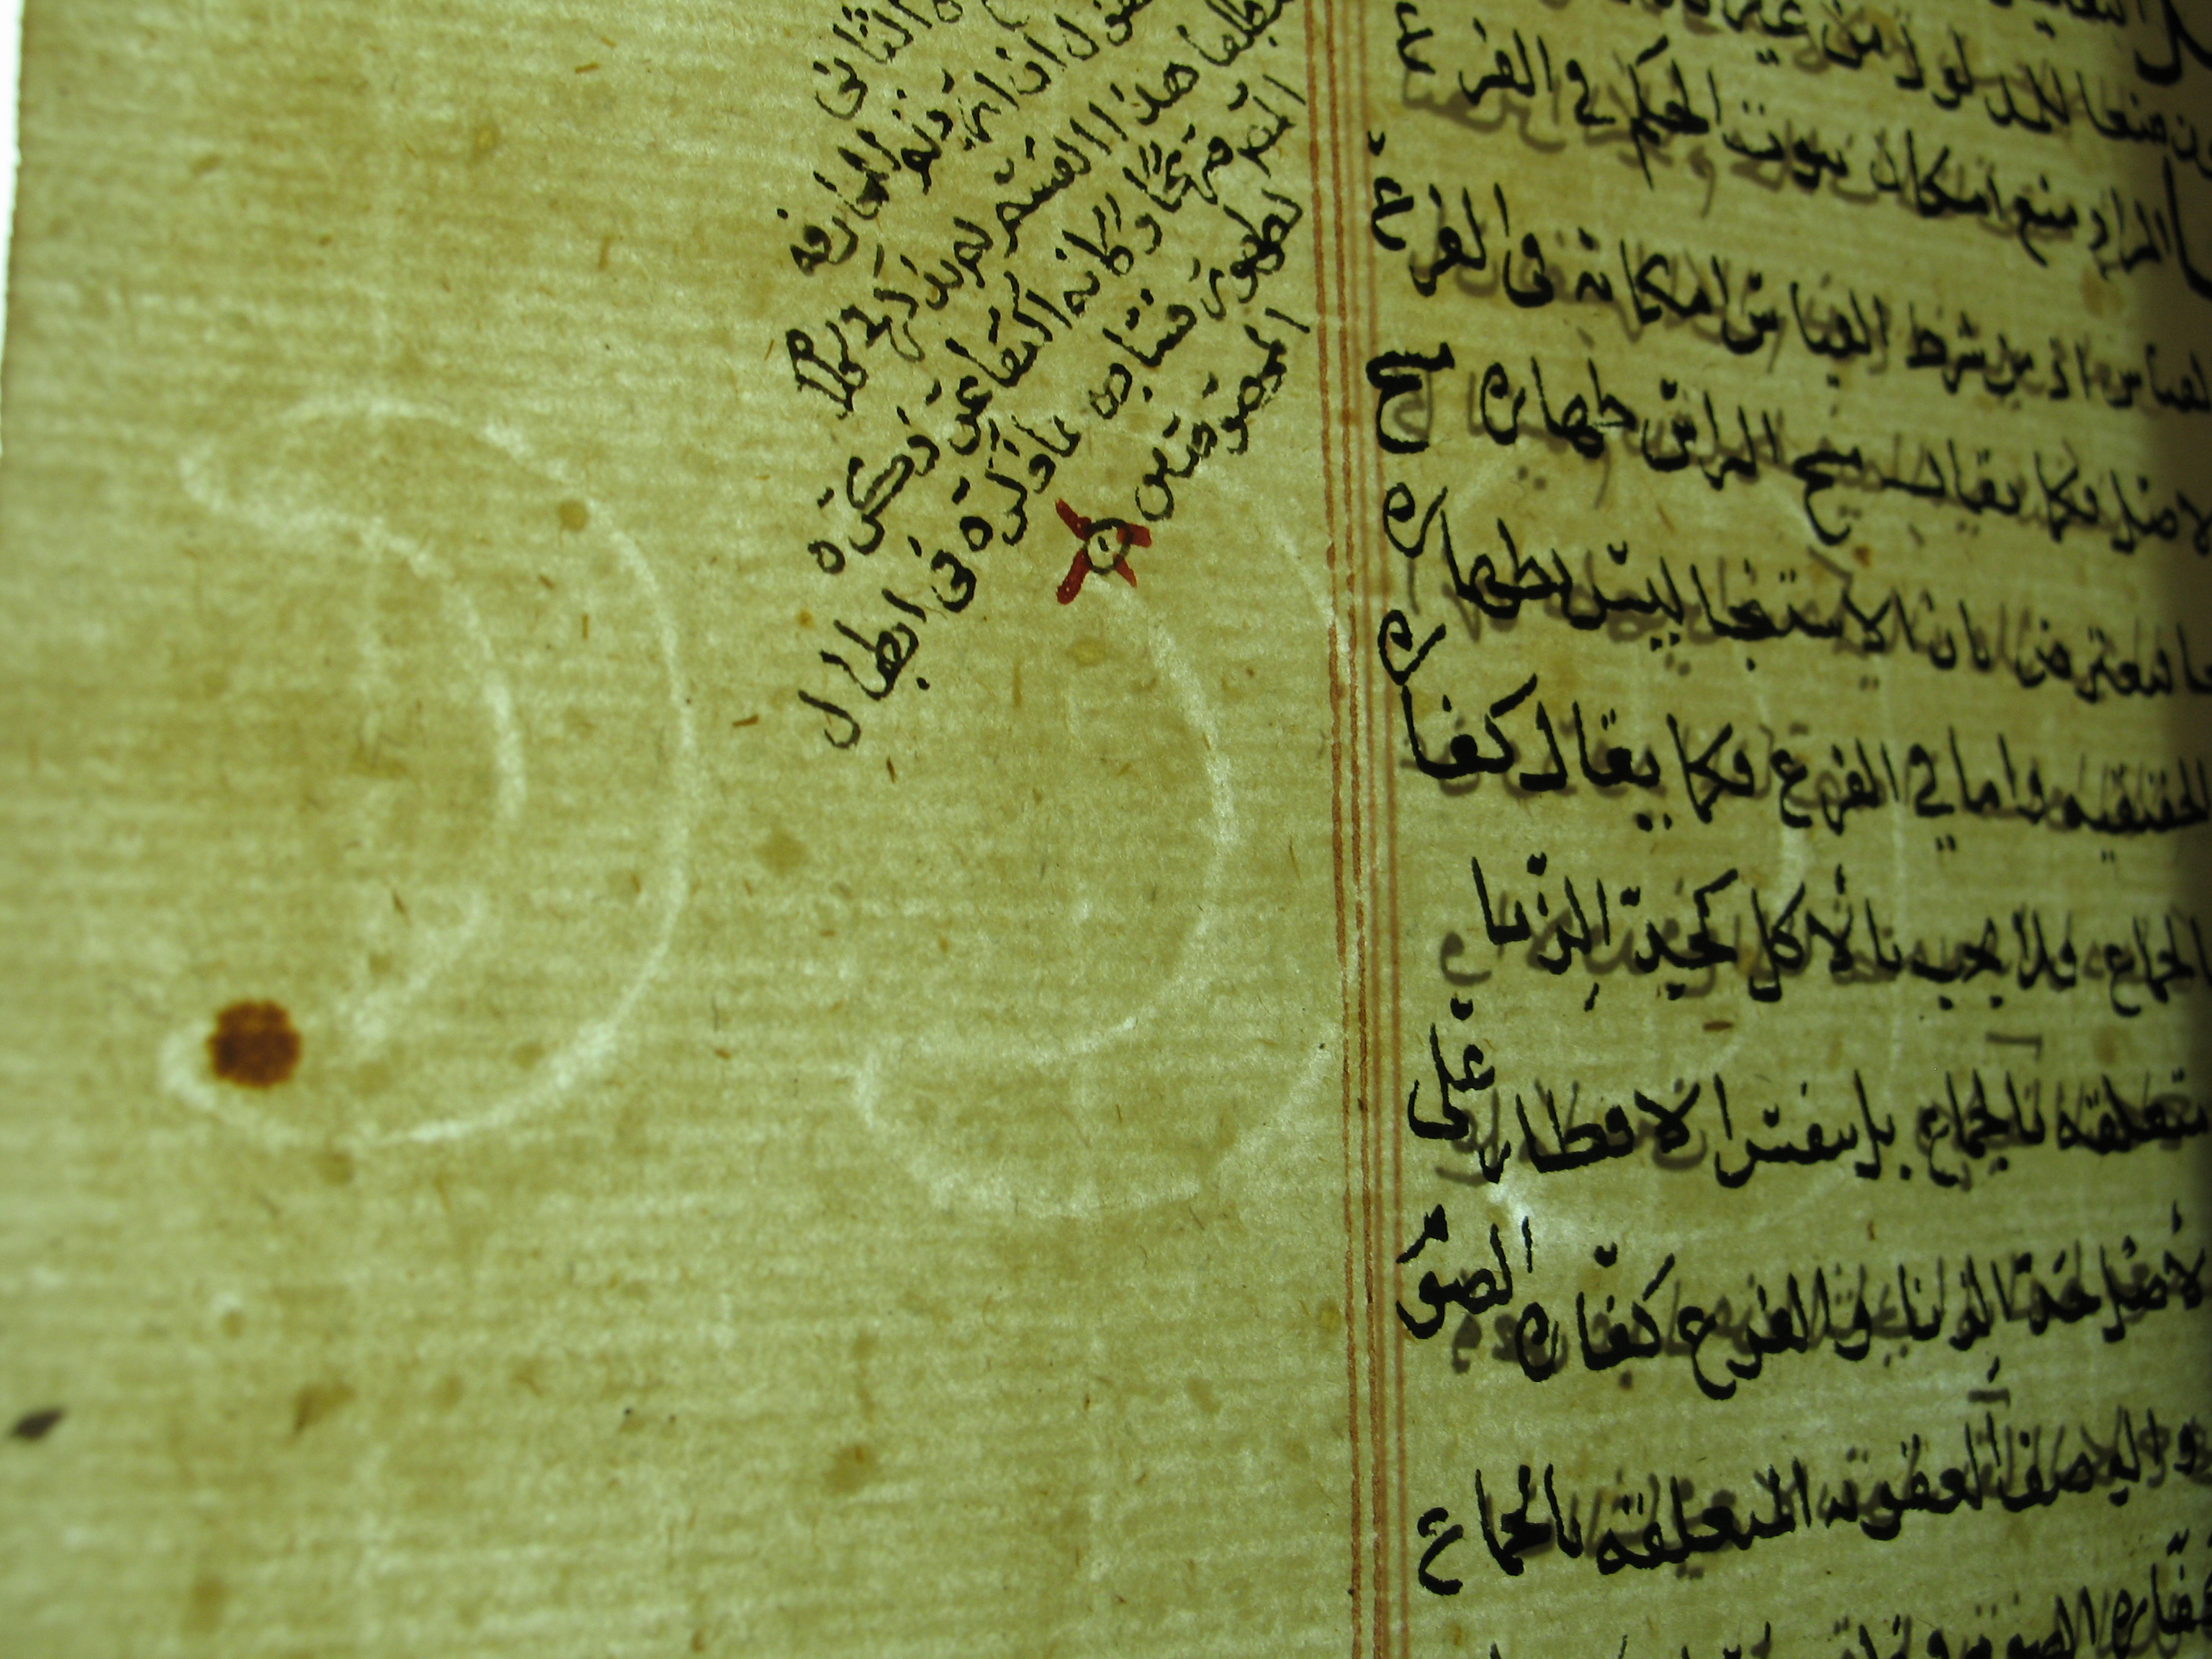 One of several three crescents marks in Isl. Ms. 564, copied in 1679 in Yemen. This mark is in p.490. 